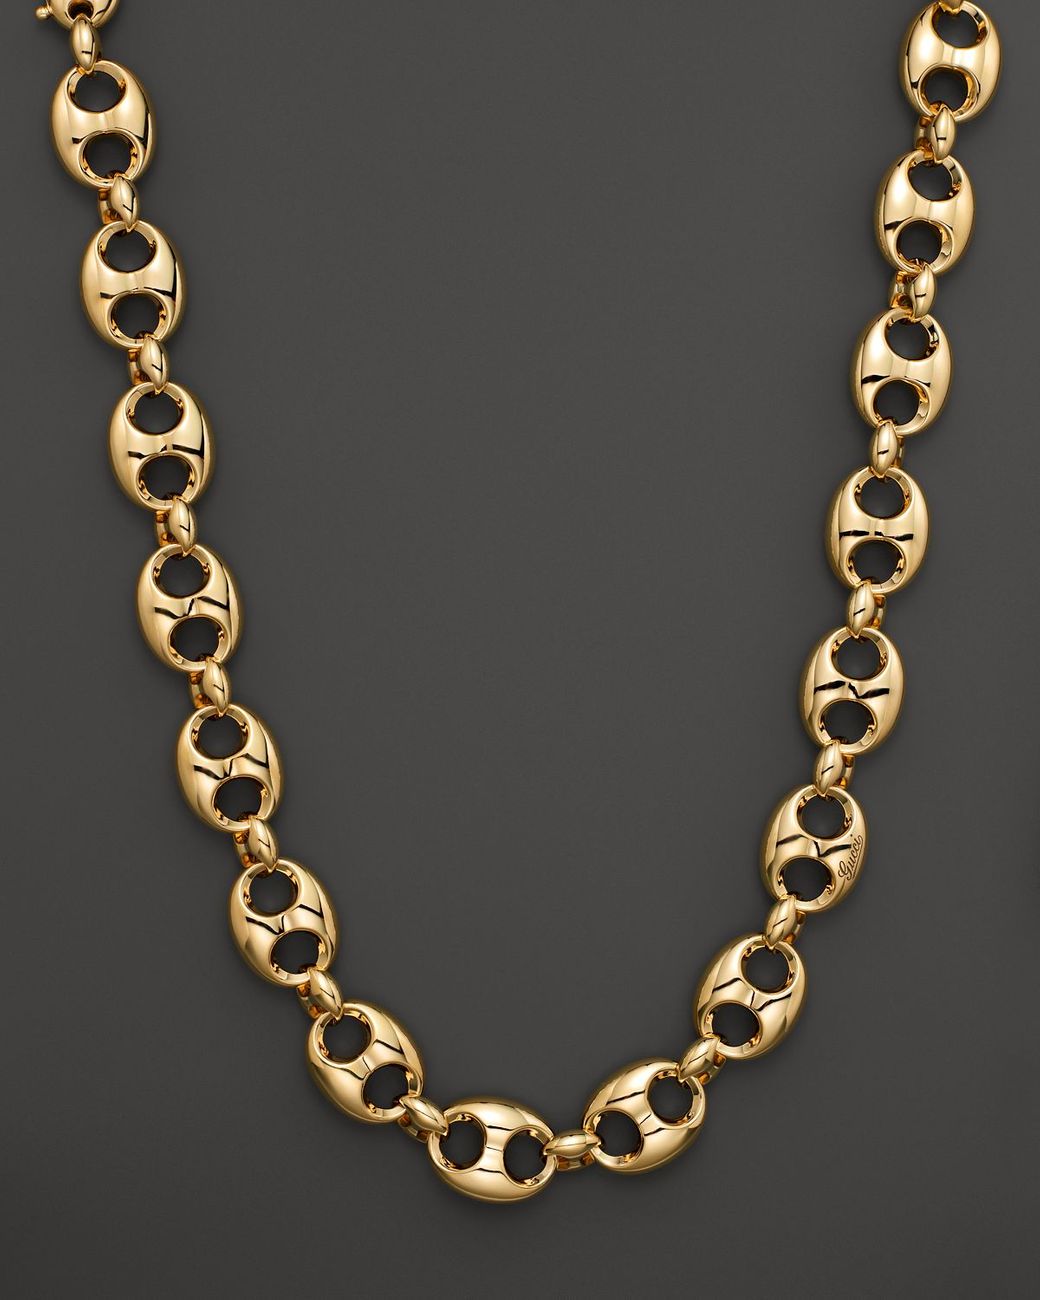 Gucci Marina Chain Necklace in 18k Yellow Gold in Metallic | Lyst